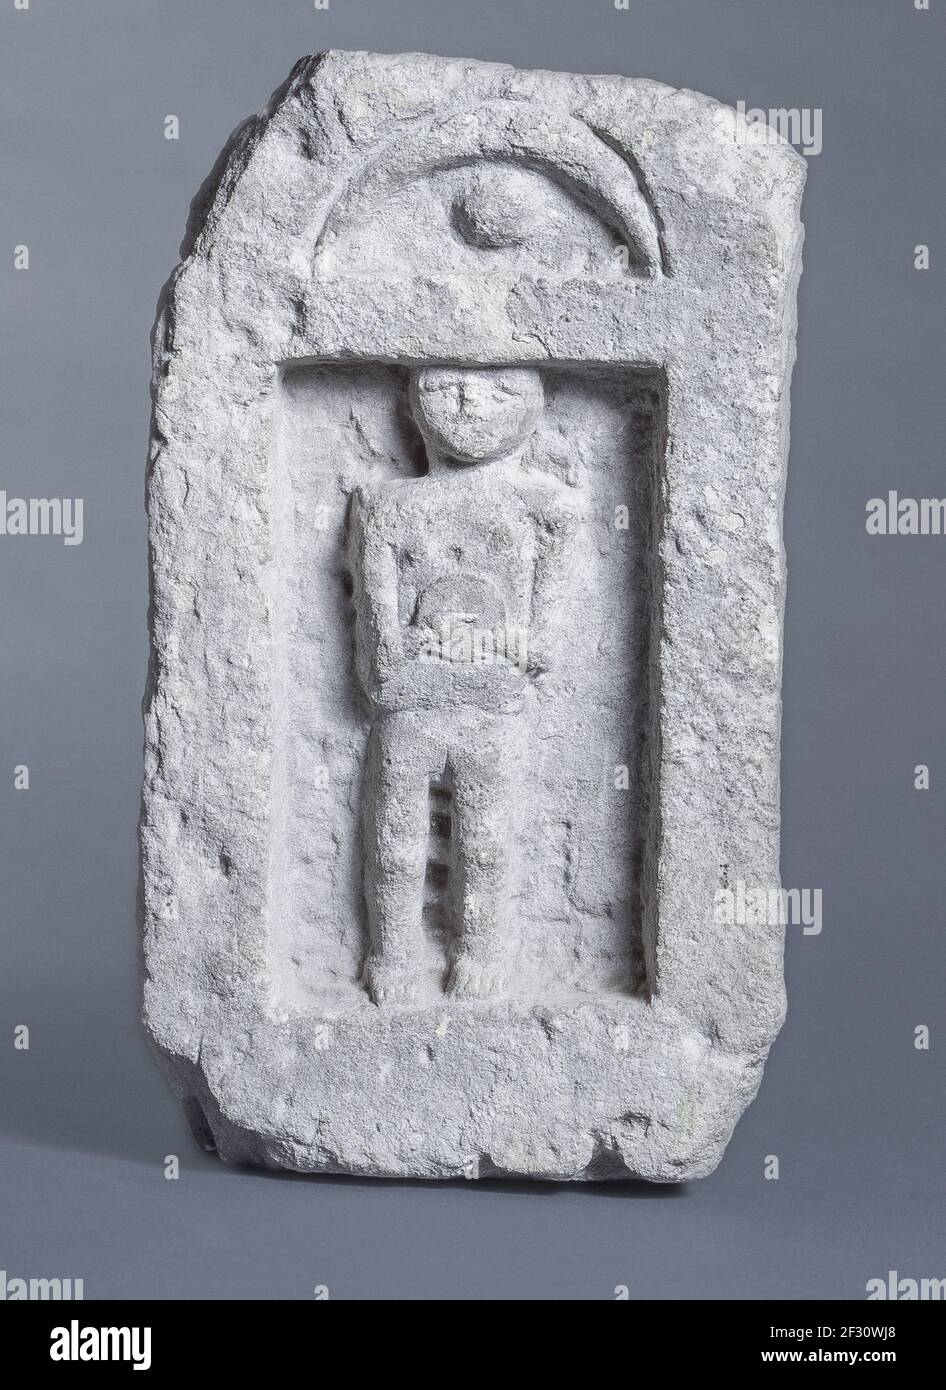 Itsly Sardinia Province of Cagliari - Sant'Antioco - Archaelogical civic museum -Punic stele from the tophet of Sant'Antioco - female figure with chest disc inside aedicule with astral symbols Stock Photo